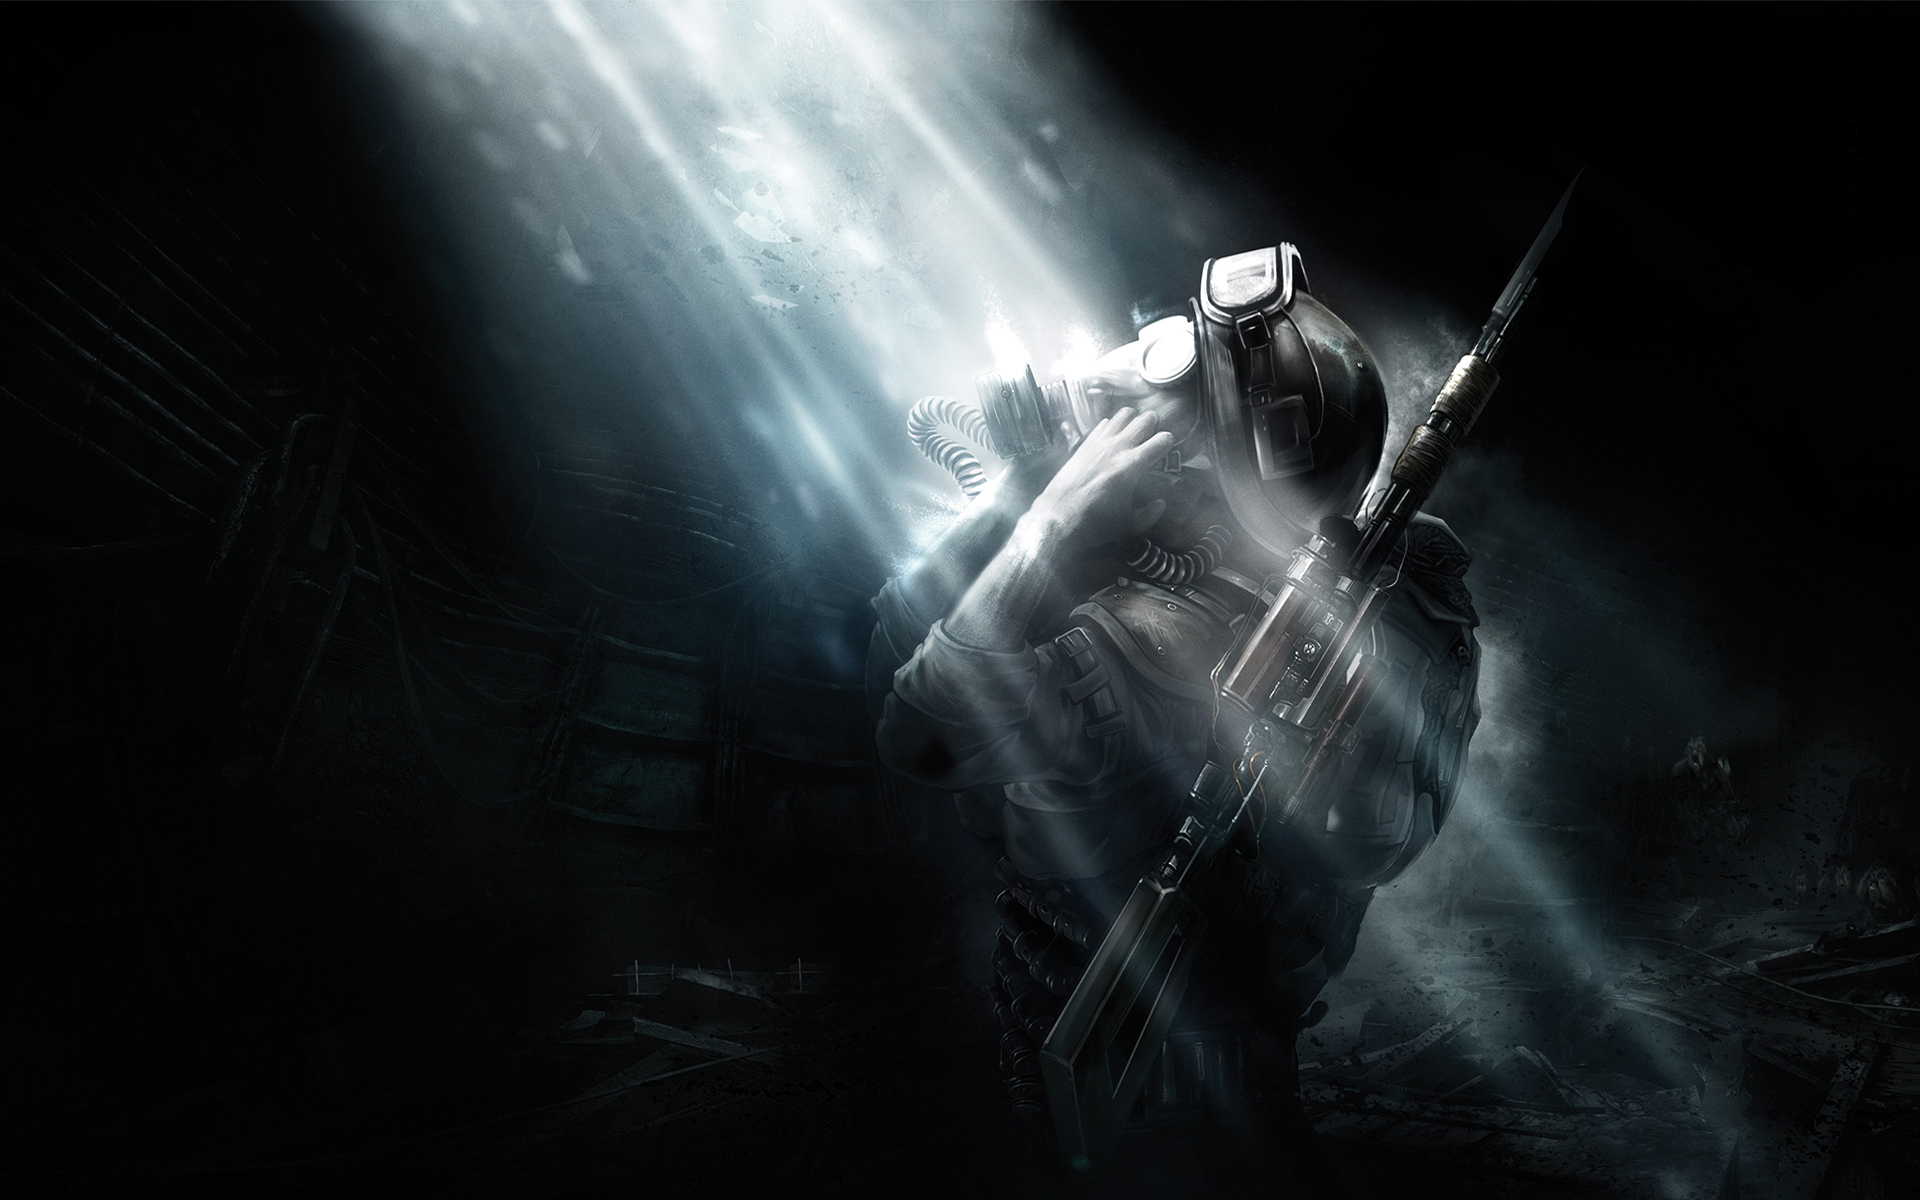 Cool Backgrounds games Metro 2033